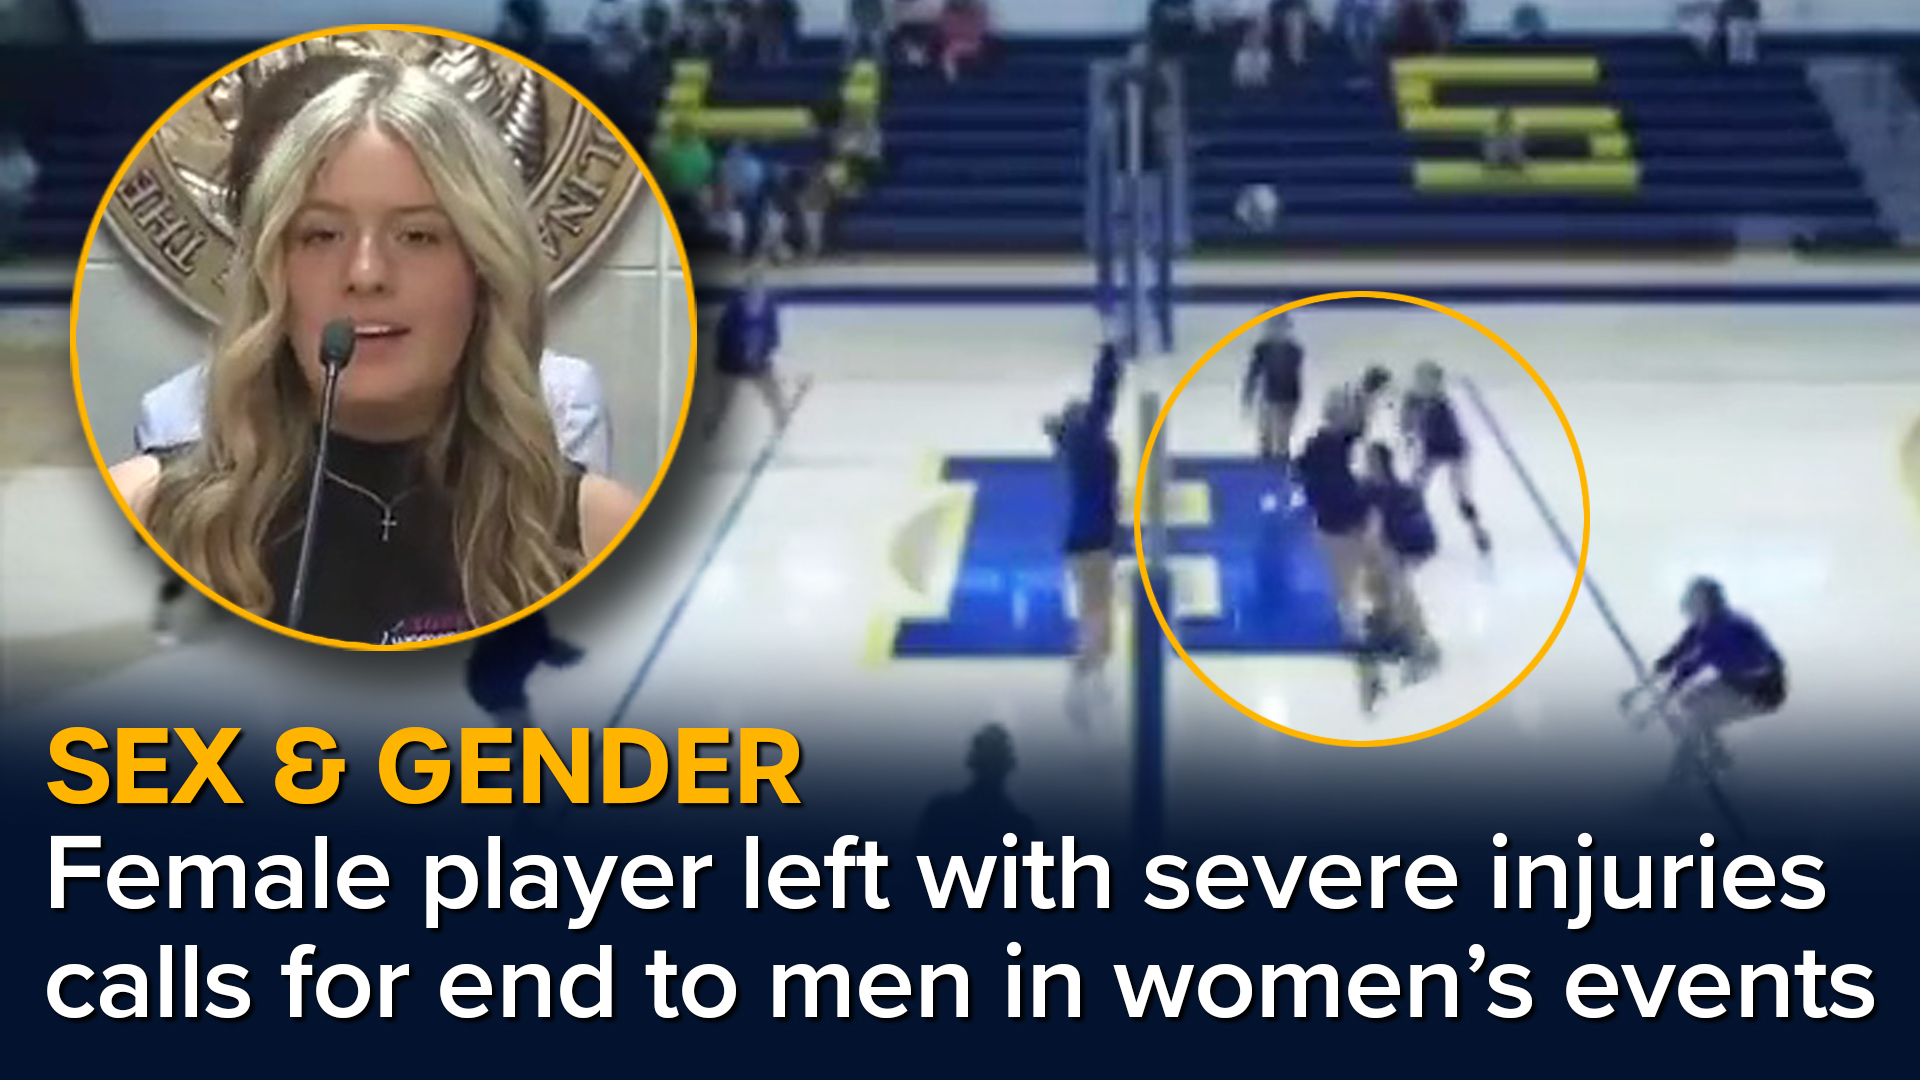 My life has changed forever' Volleyball student hit in the face by biological male